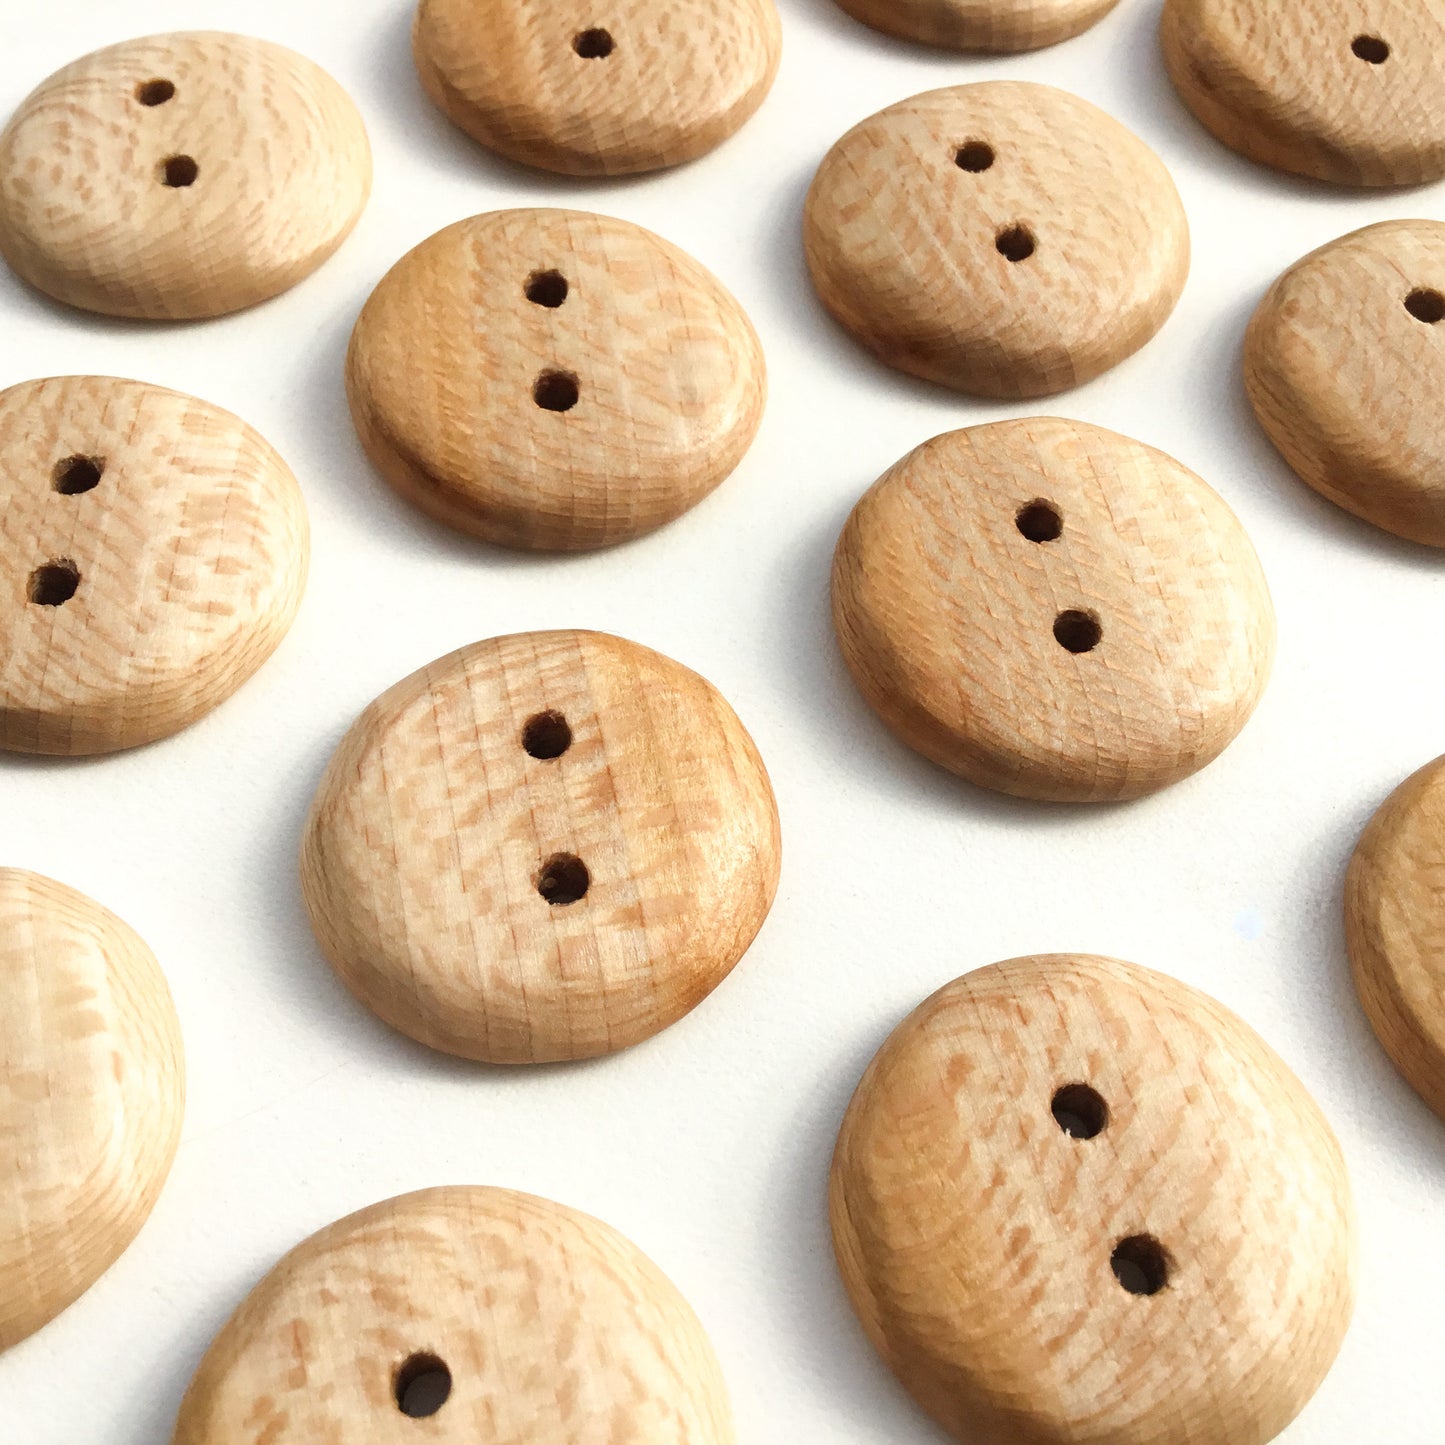 Quarter Sawn Sycamore Wood Buttons - 1 3/16"